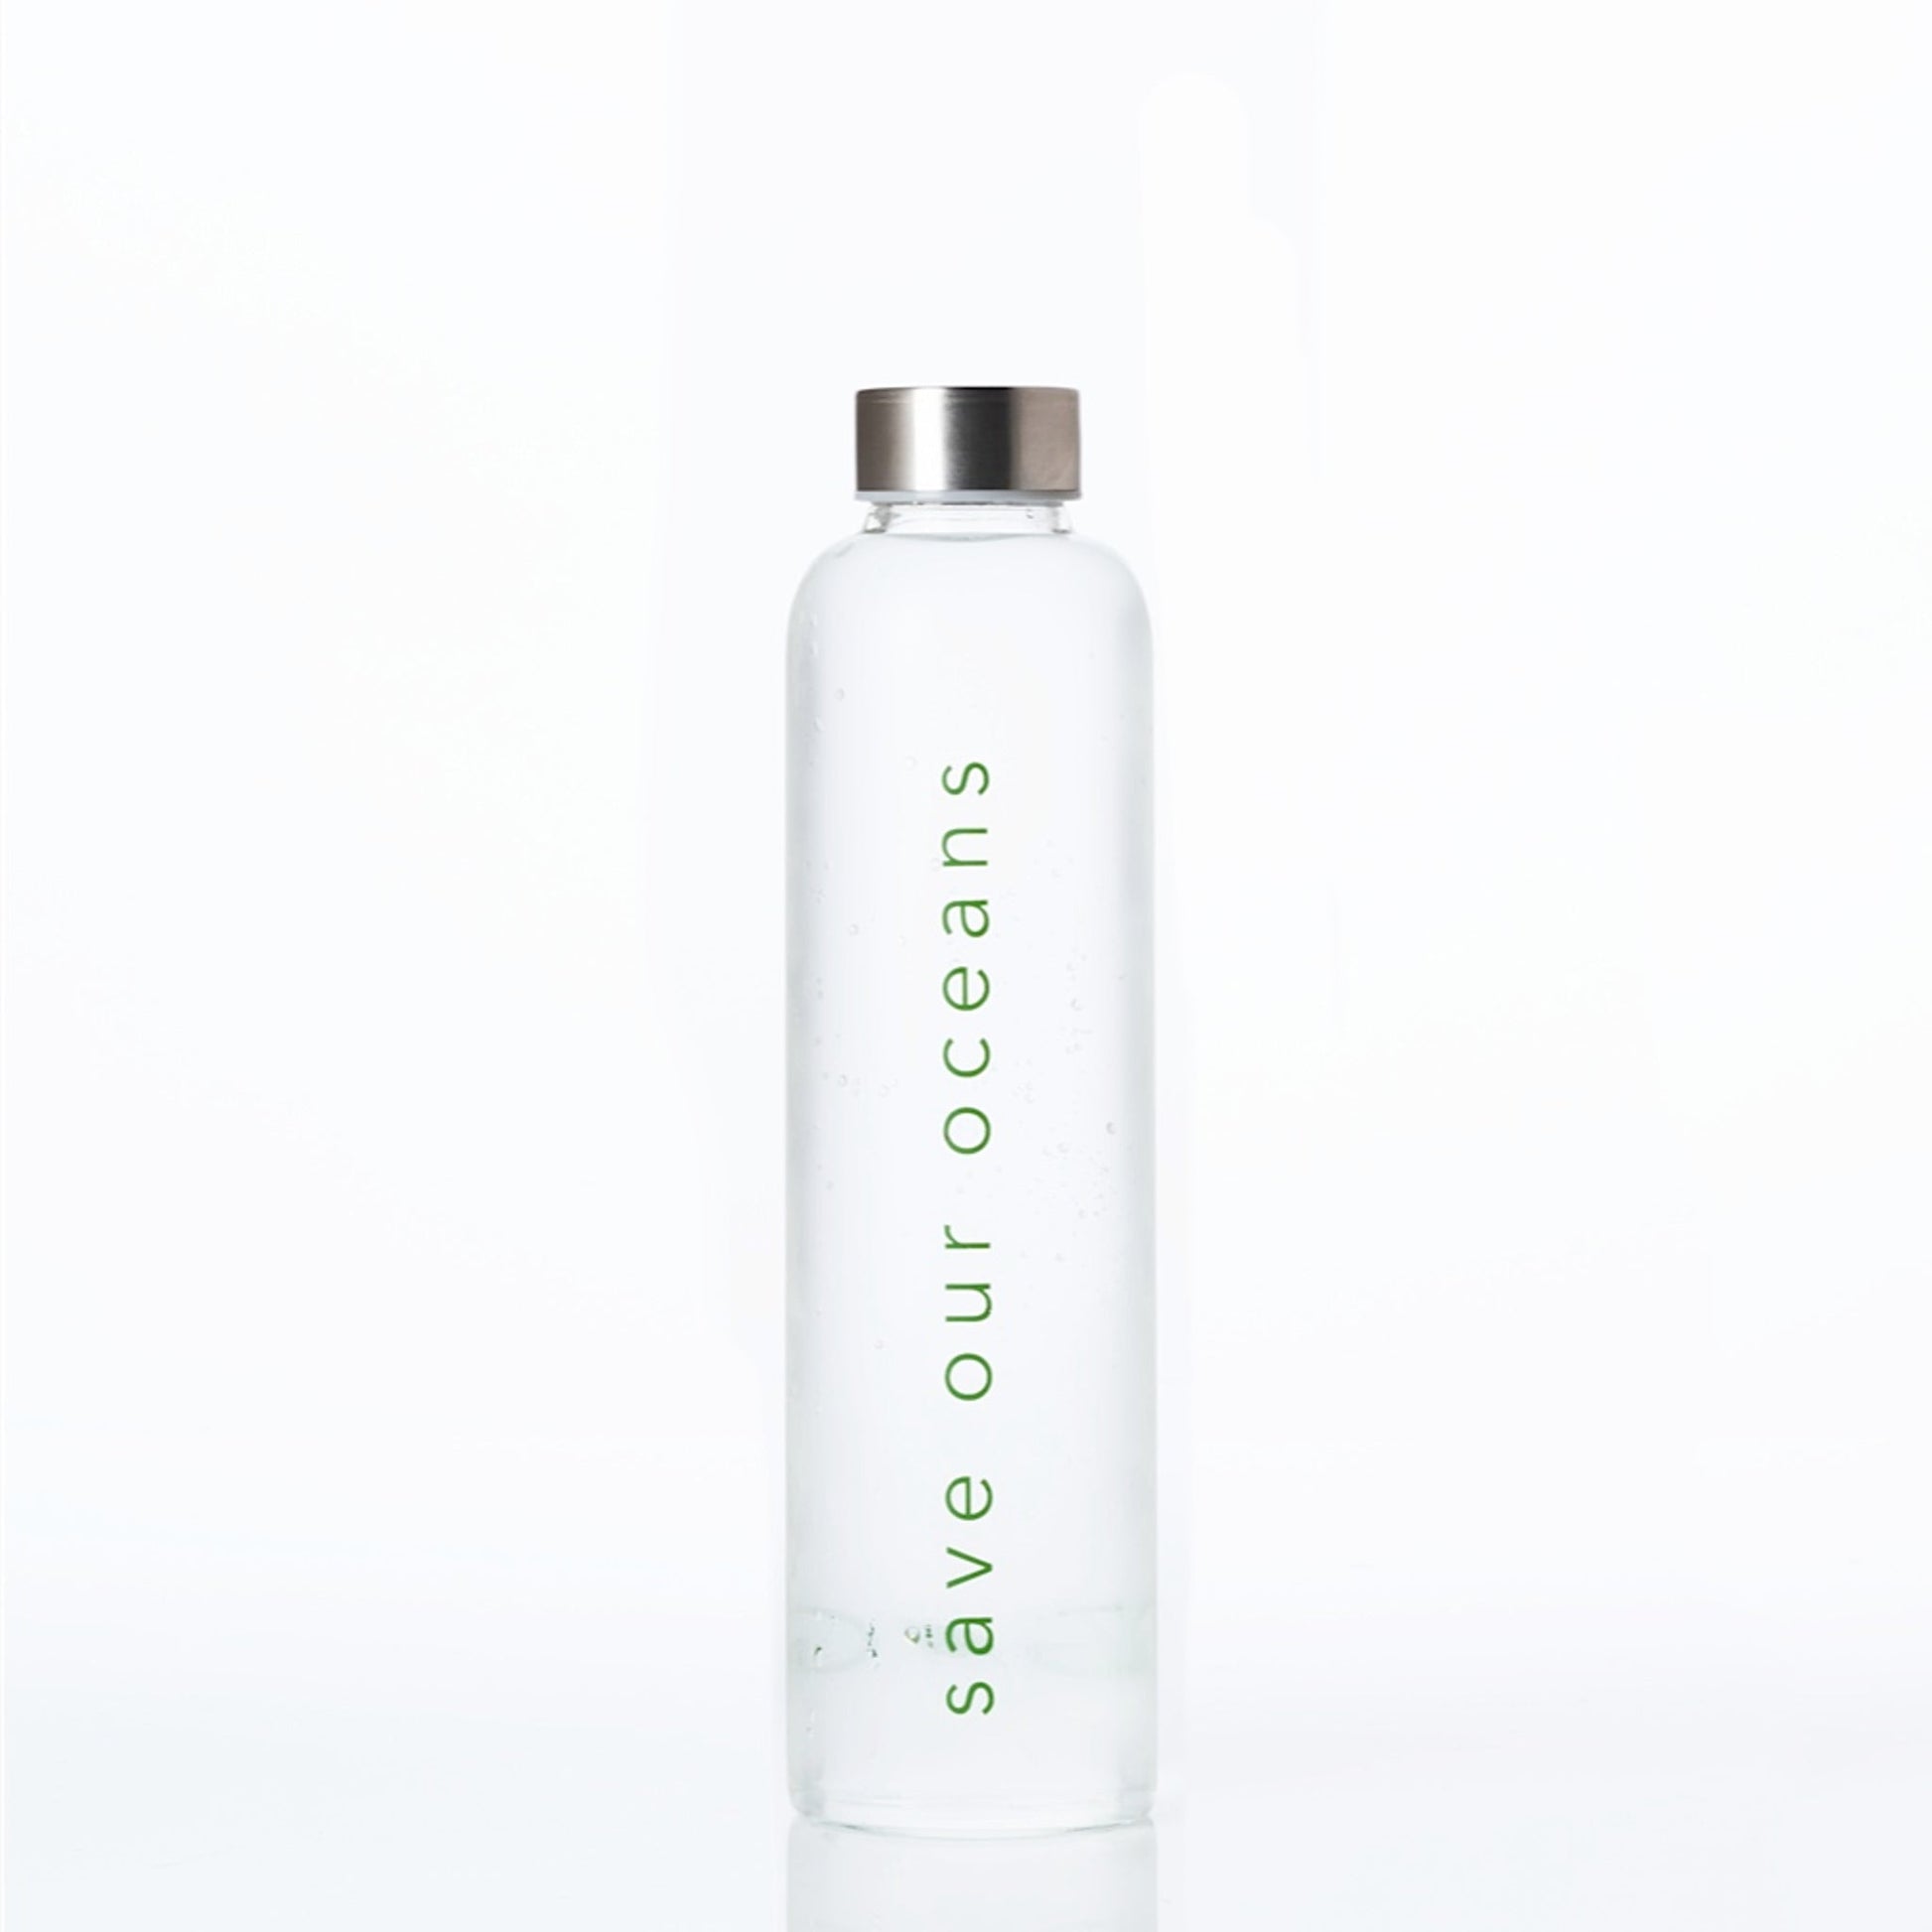 'Glass is Greener' 25 oz Travel Bottle and 'Swirl' Carry Cover by BBBYO-BBBYO